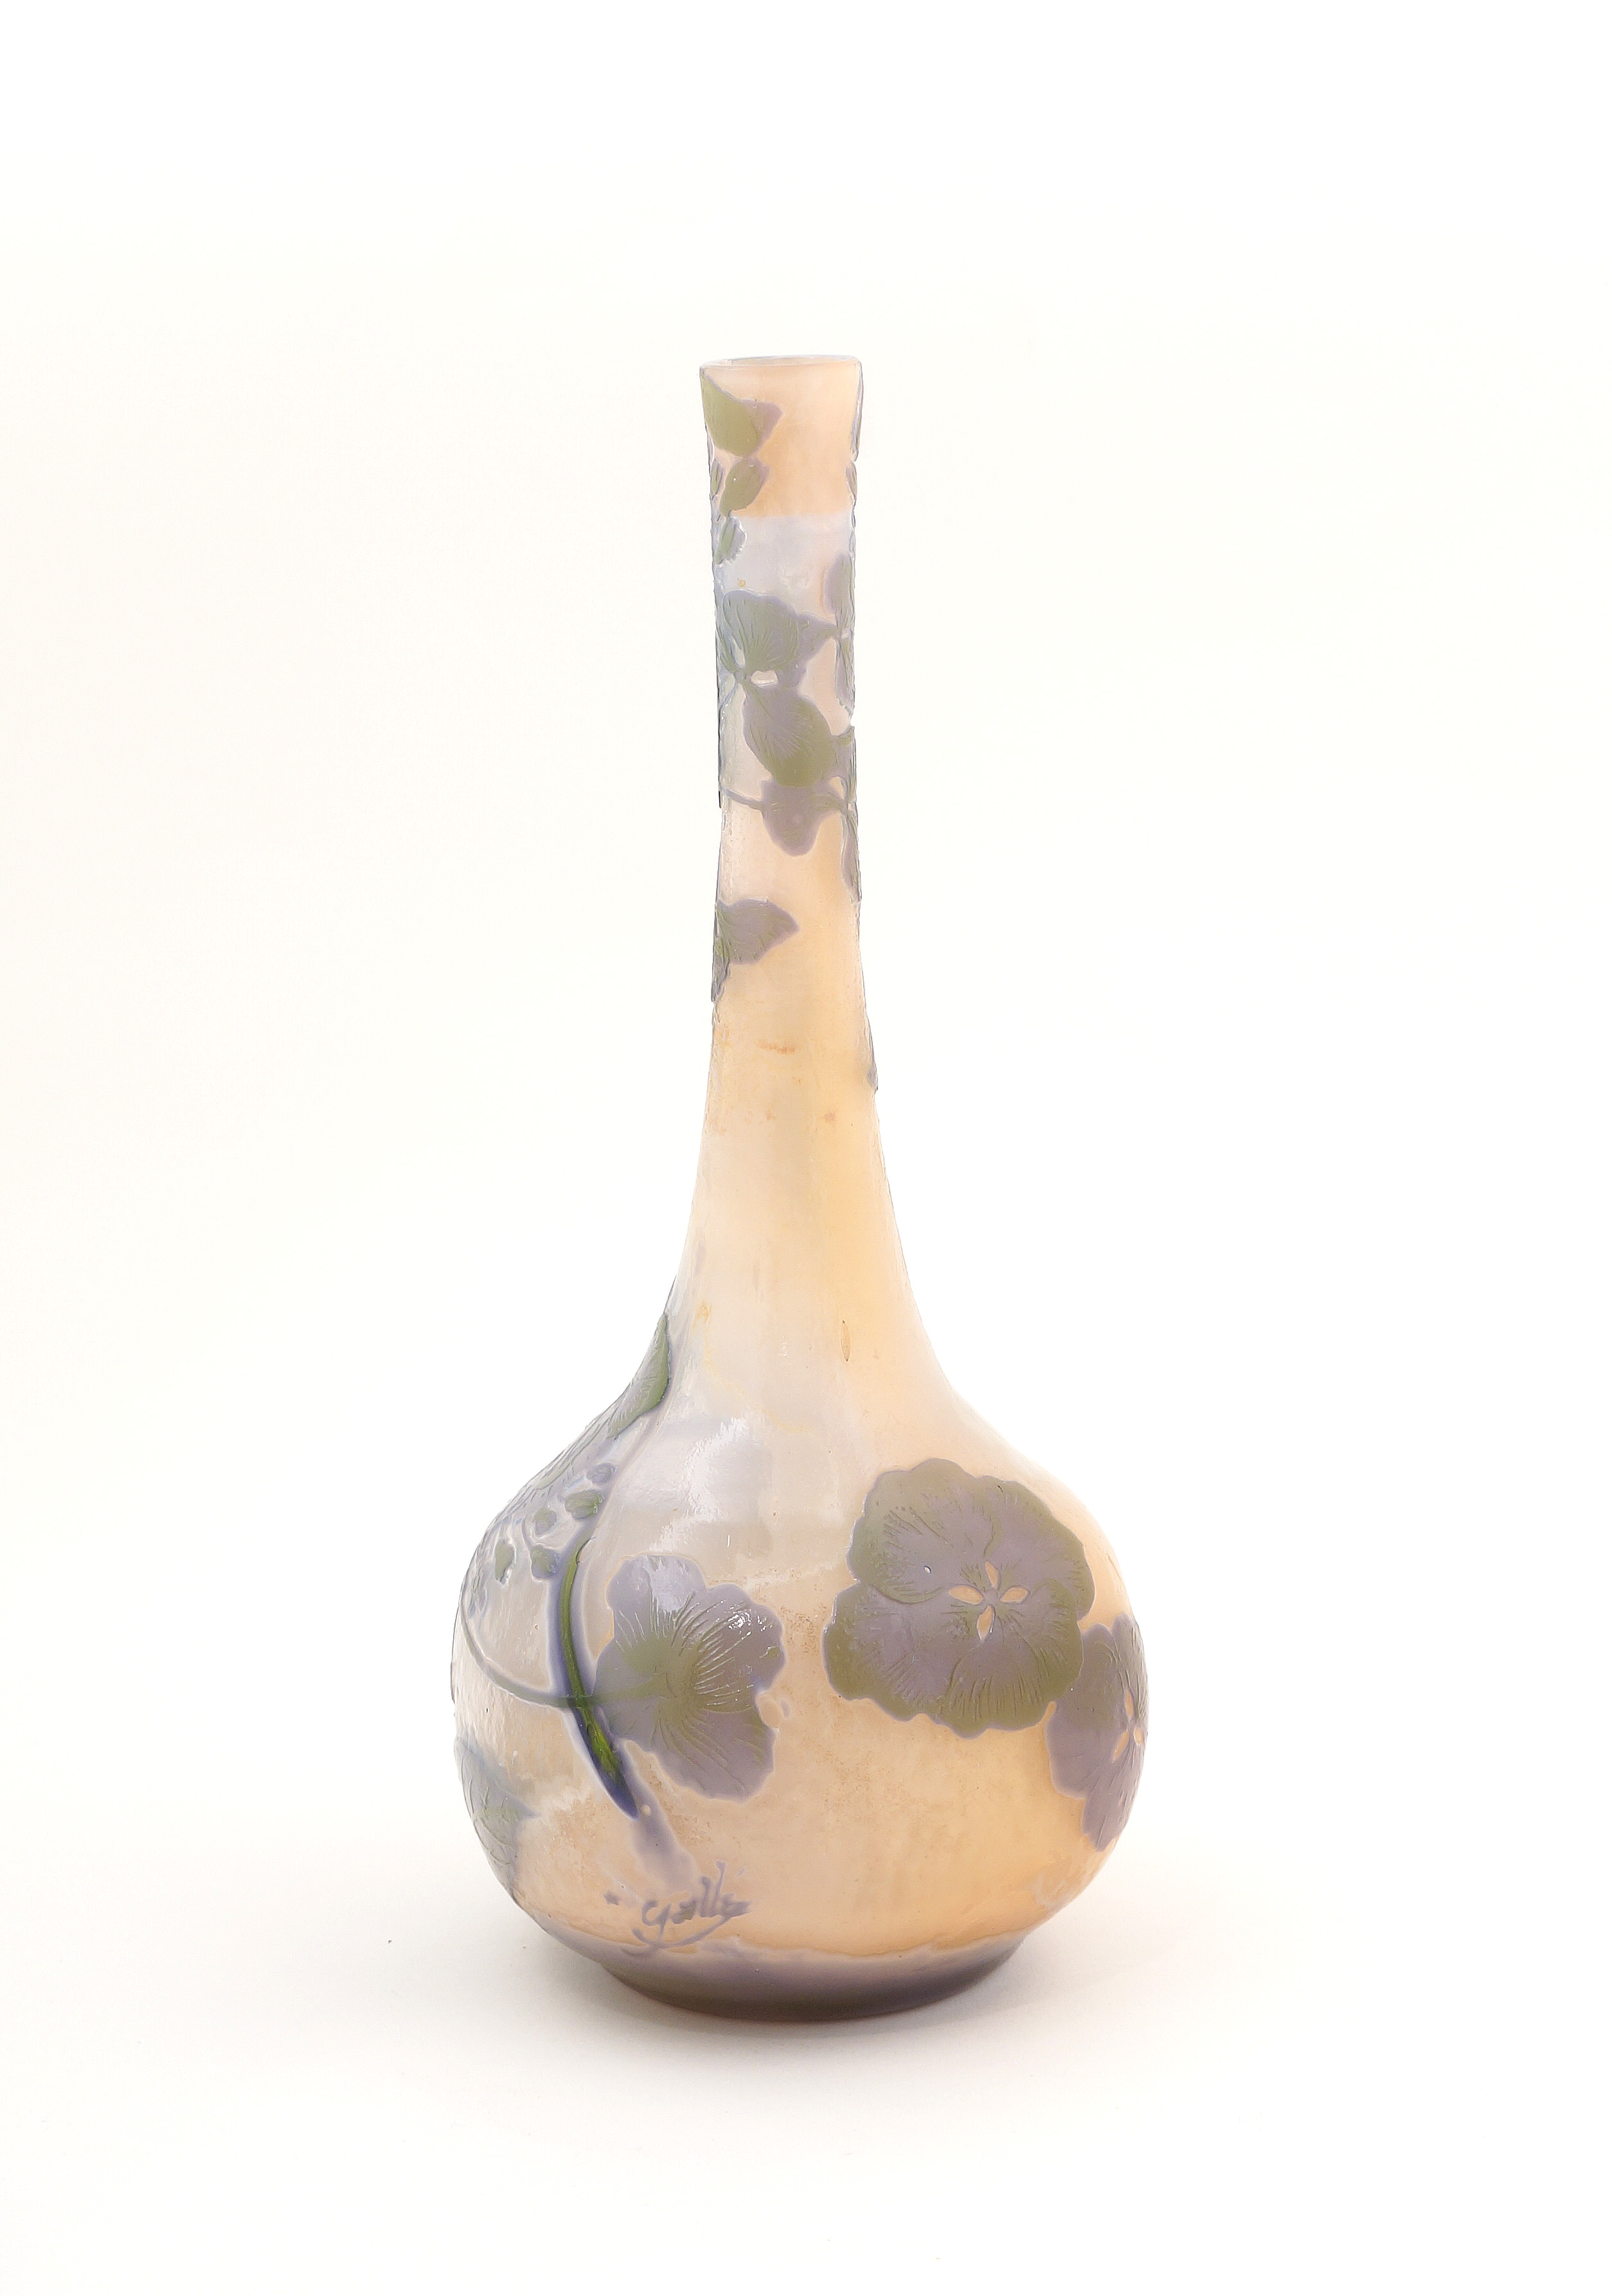 Emille Galle' A small cameo glass vase, signed Nancy, 1846-1904 h. 26 cm. - Image 2 of 2